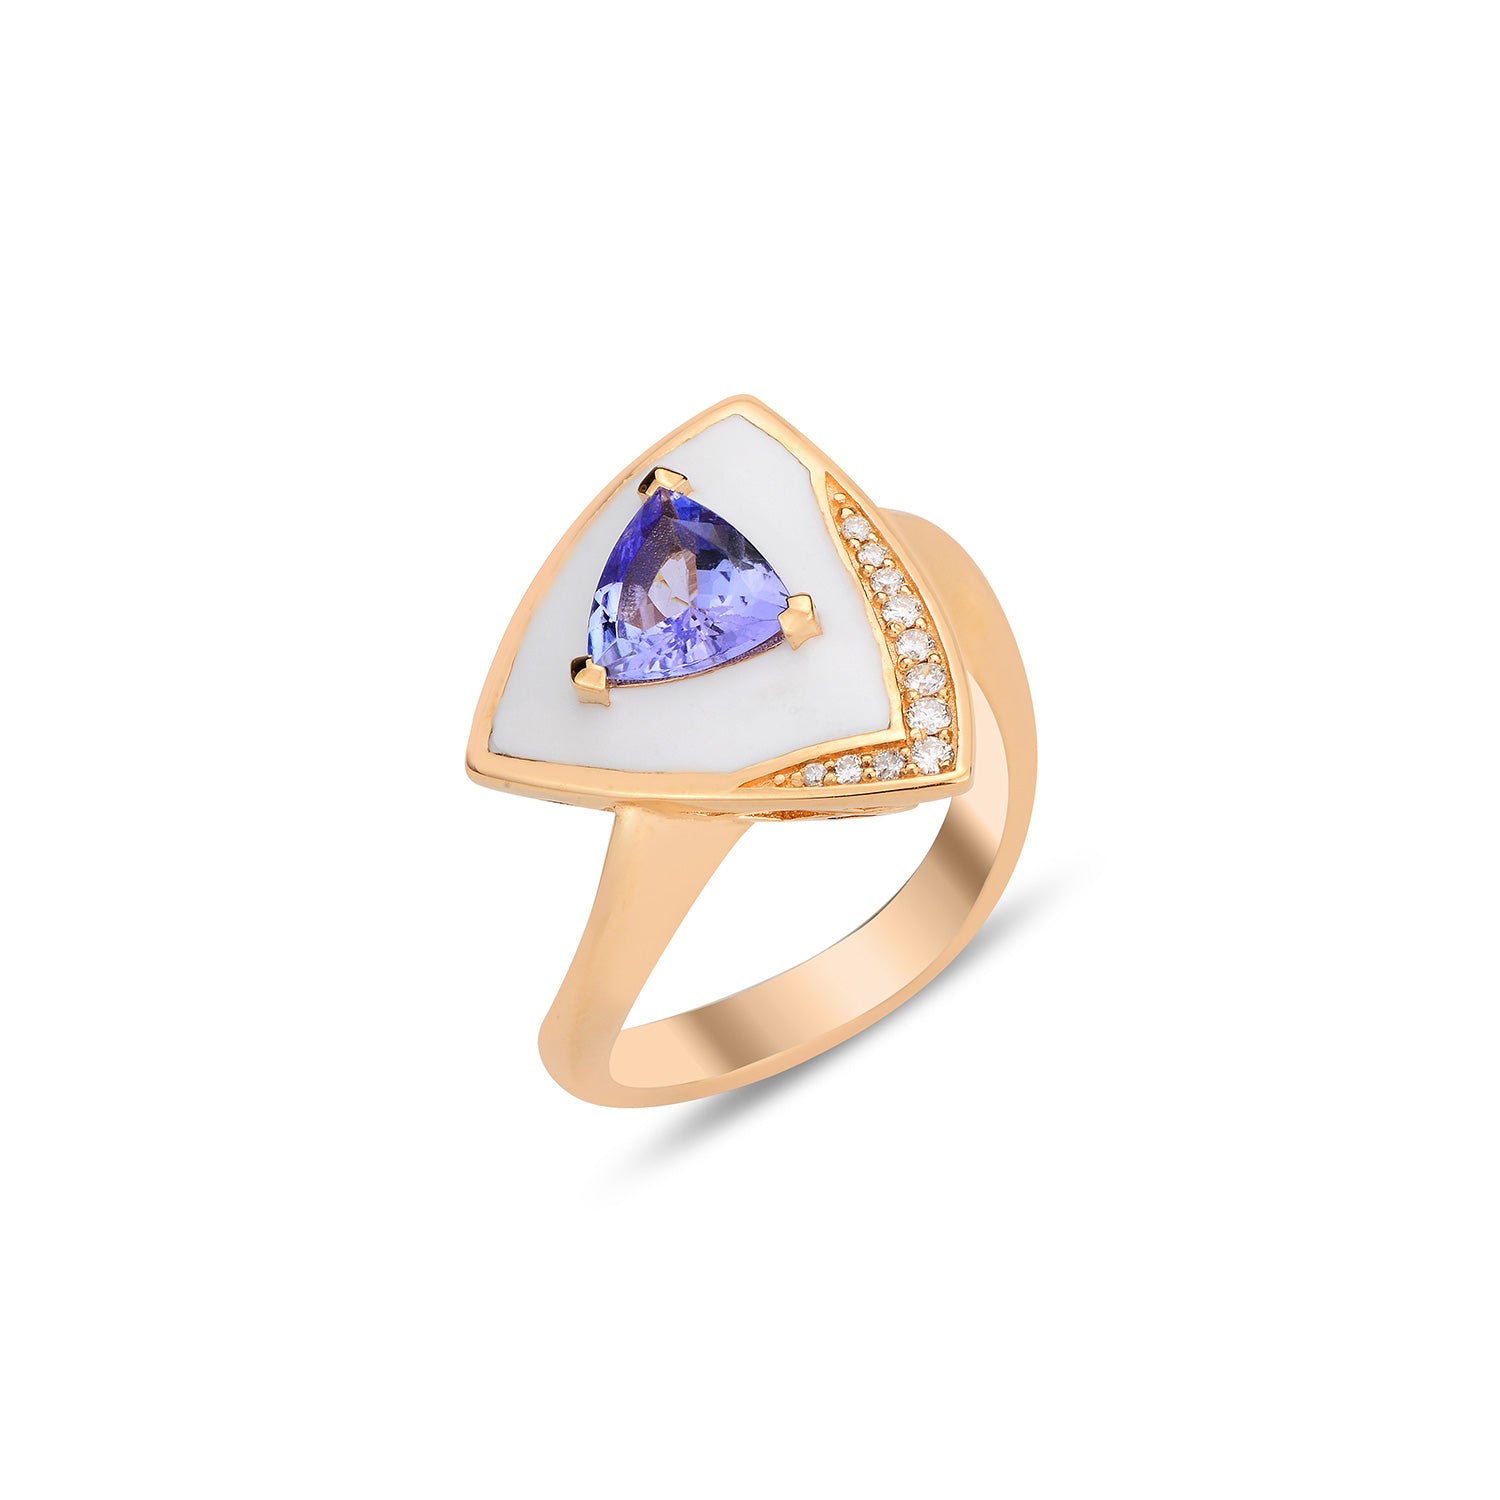 Alis Limited Edition Ring with Tanzanite